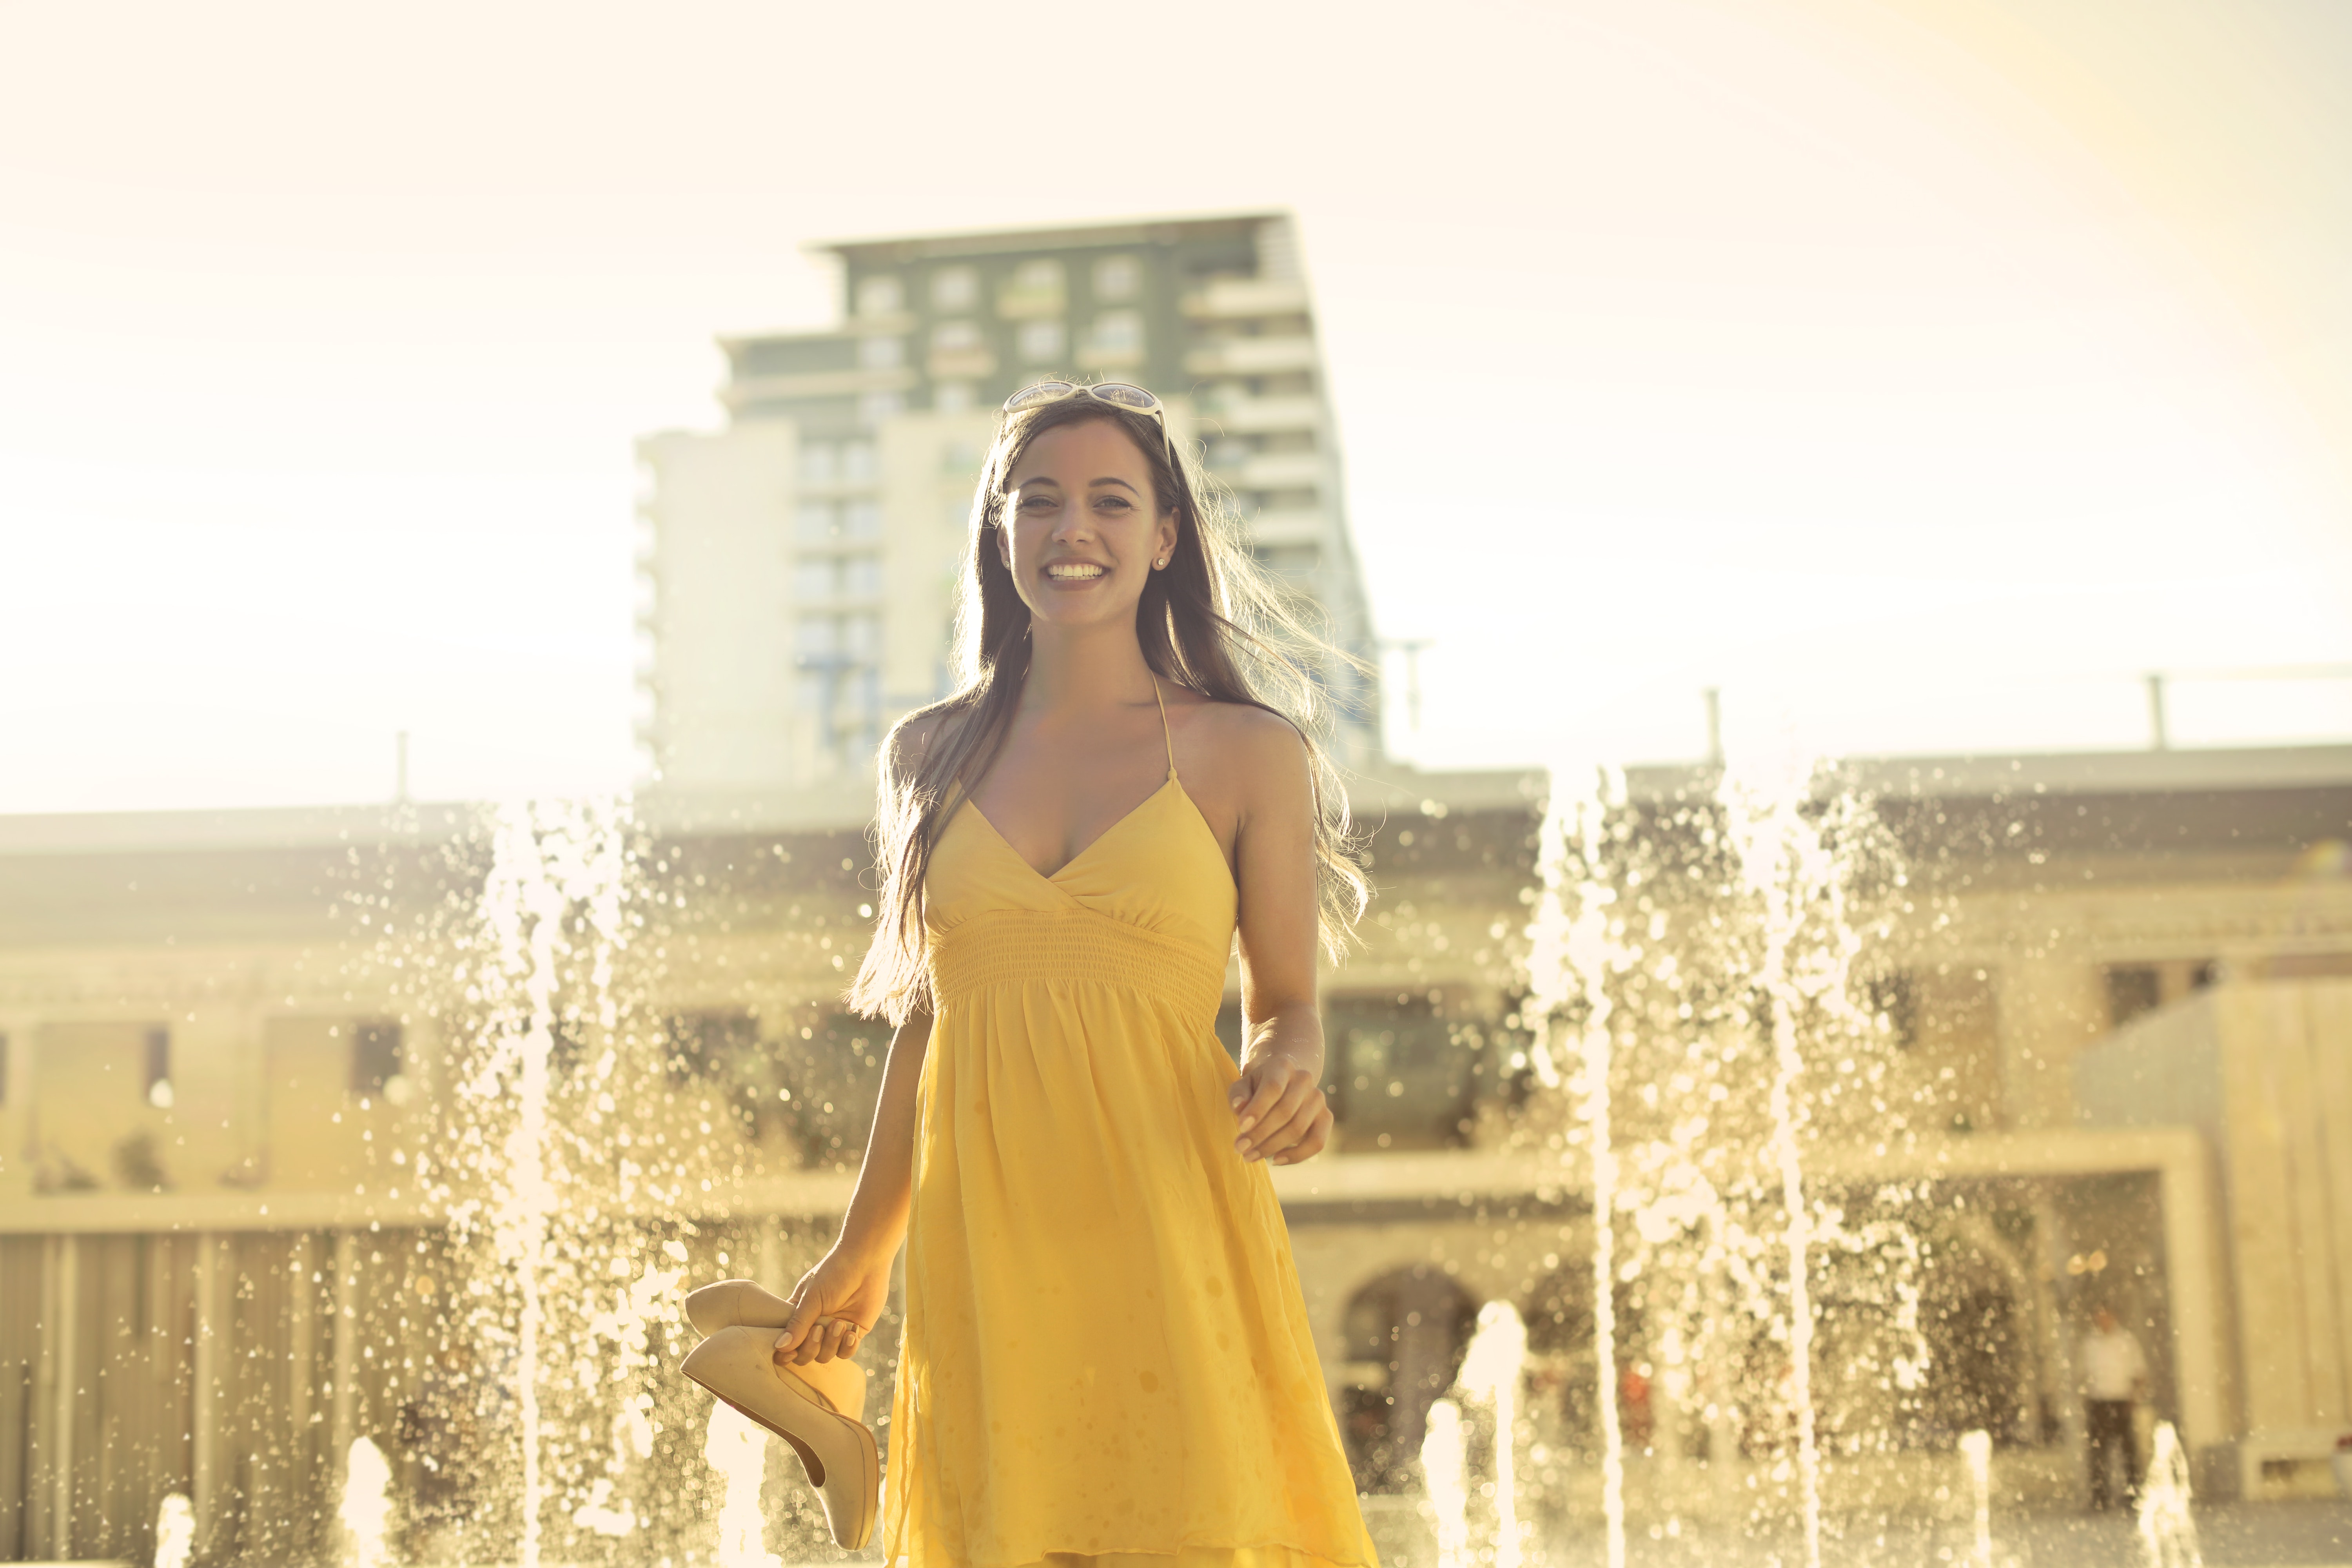 Woman Wears Yellow Spaghetti Strap Dress Stands Near Water Fountain, Adult, Shoes, Outdoors, Person, HQ Photo